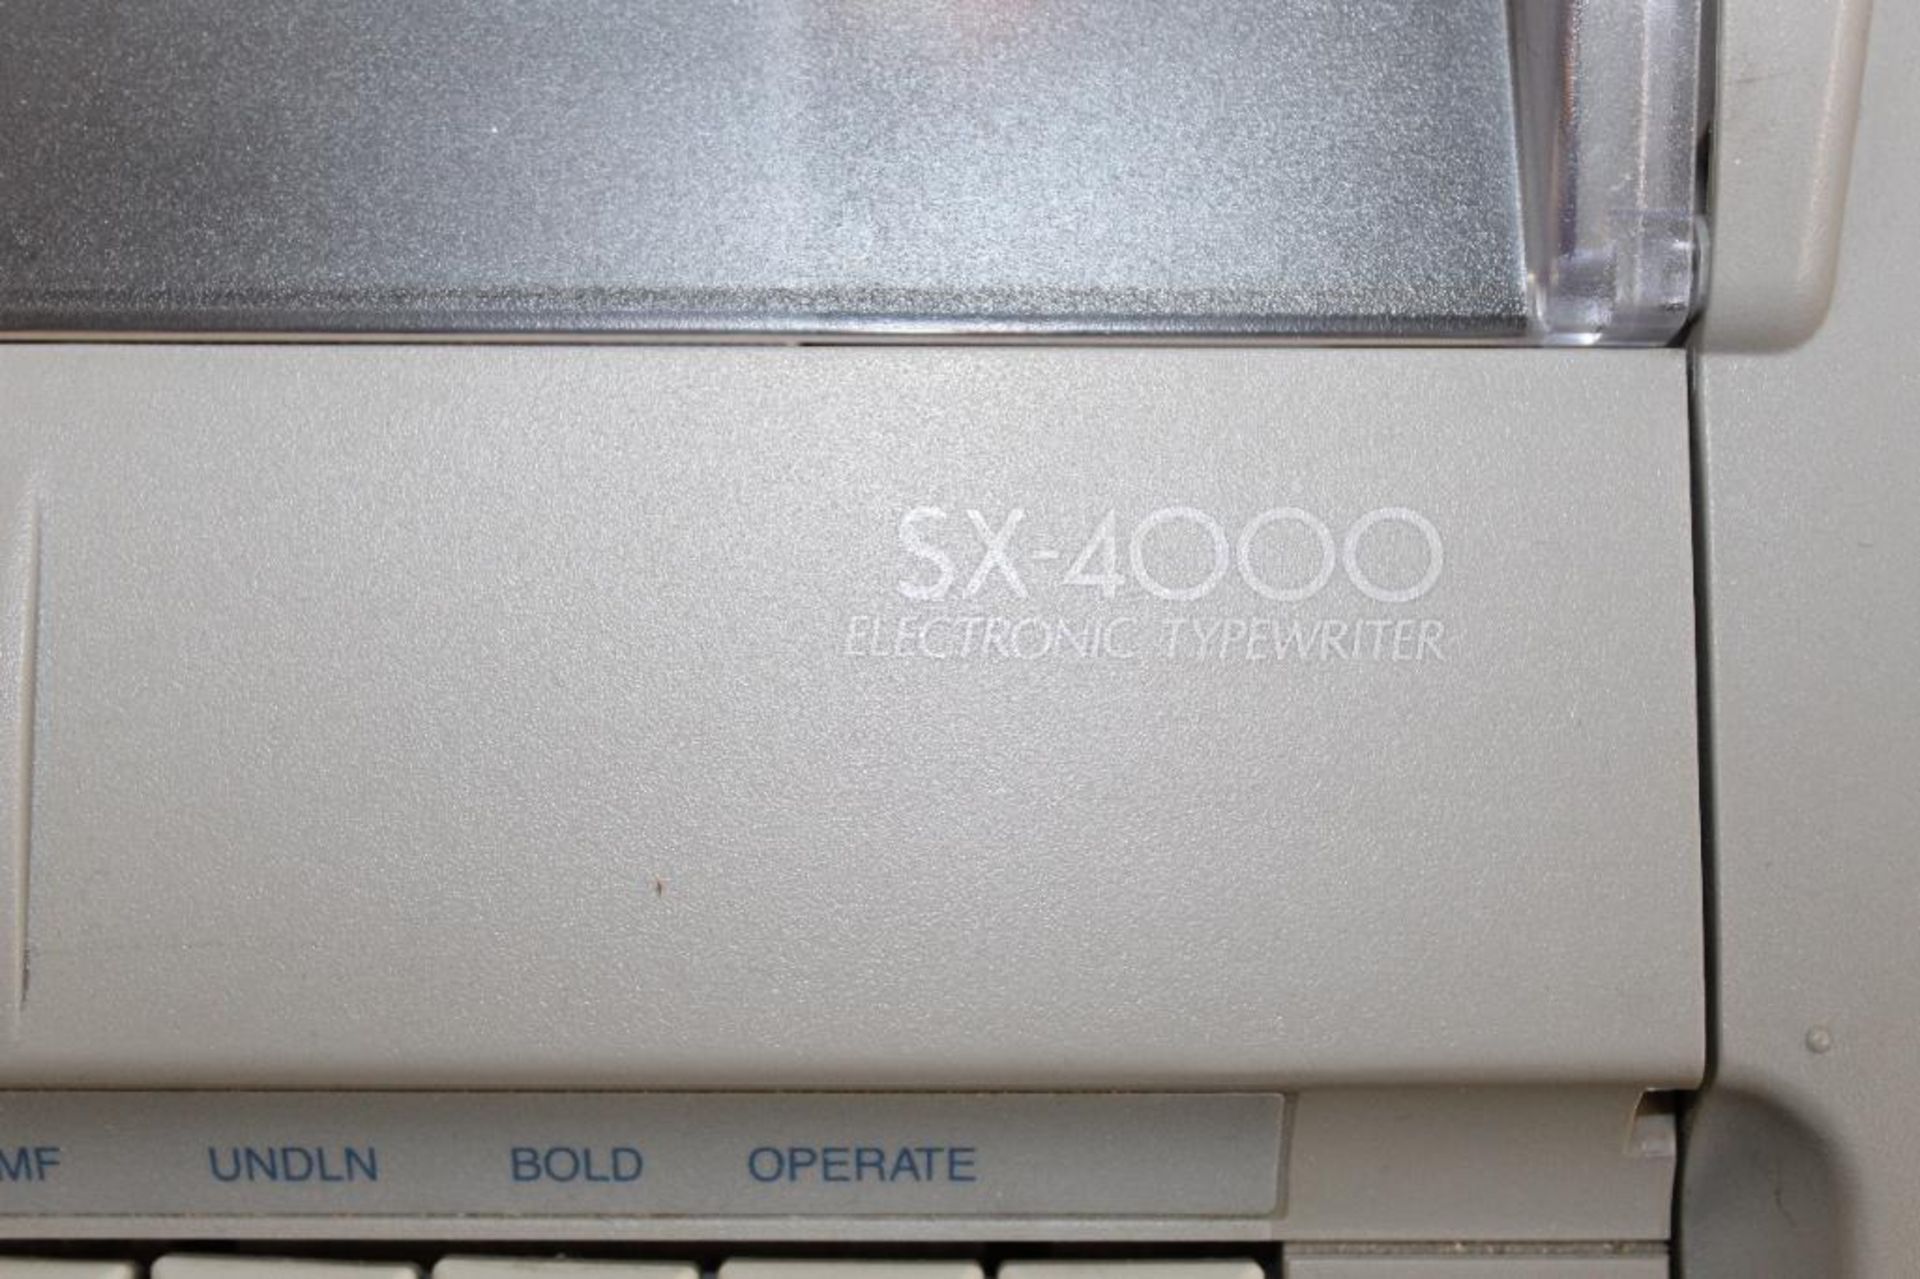 Brothers SX-4000 Electric Typewriter - Image 2 of 3